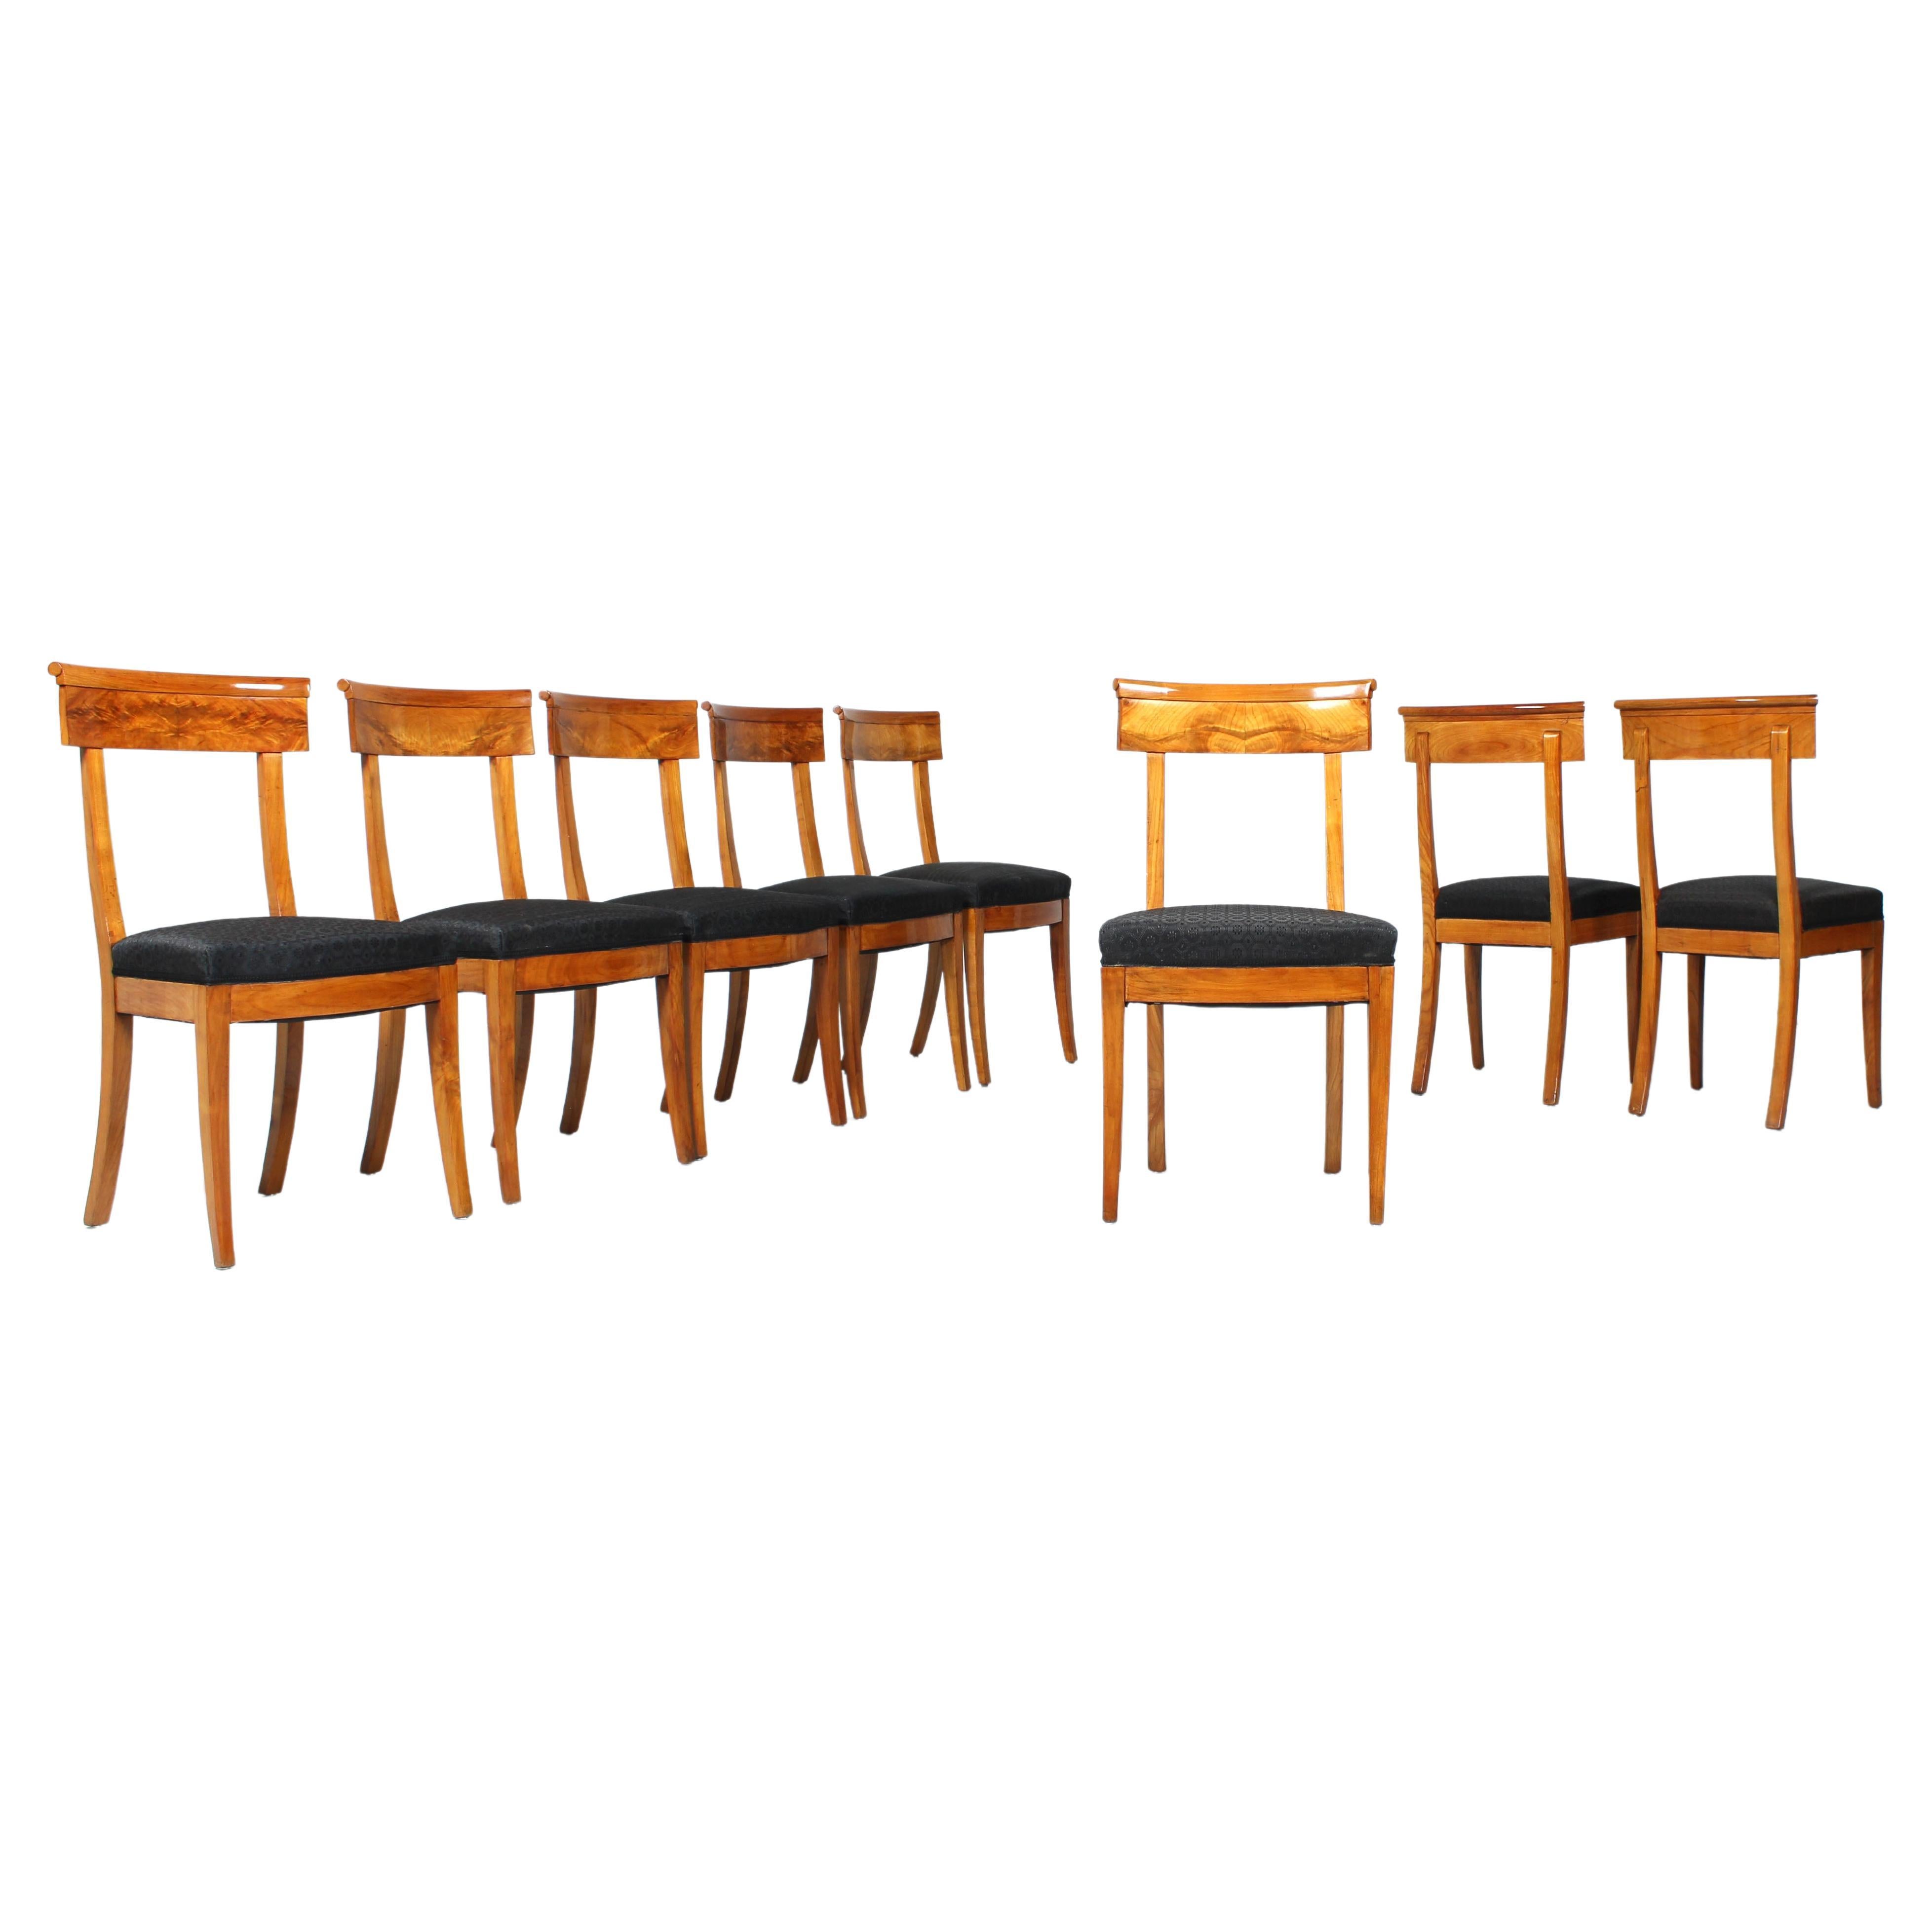 Early 19th Century Biedermeier Chairs, Set of Eight, Cherrywood, Circa 1820 For Sale